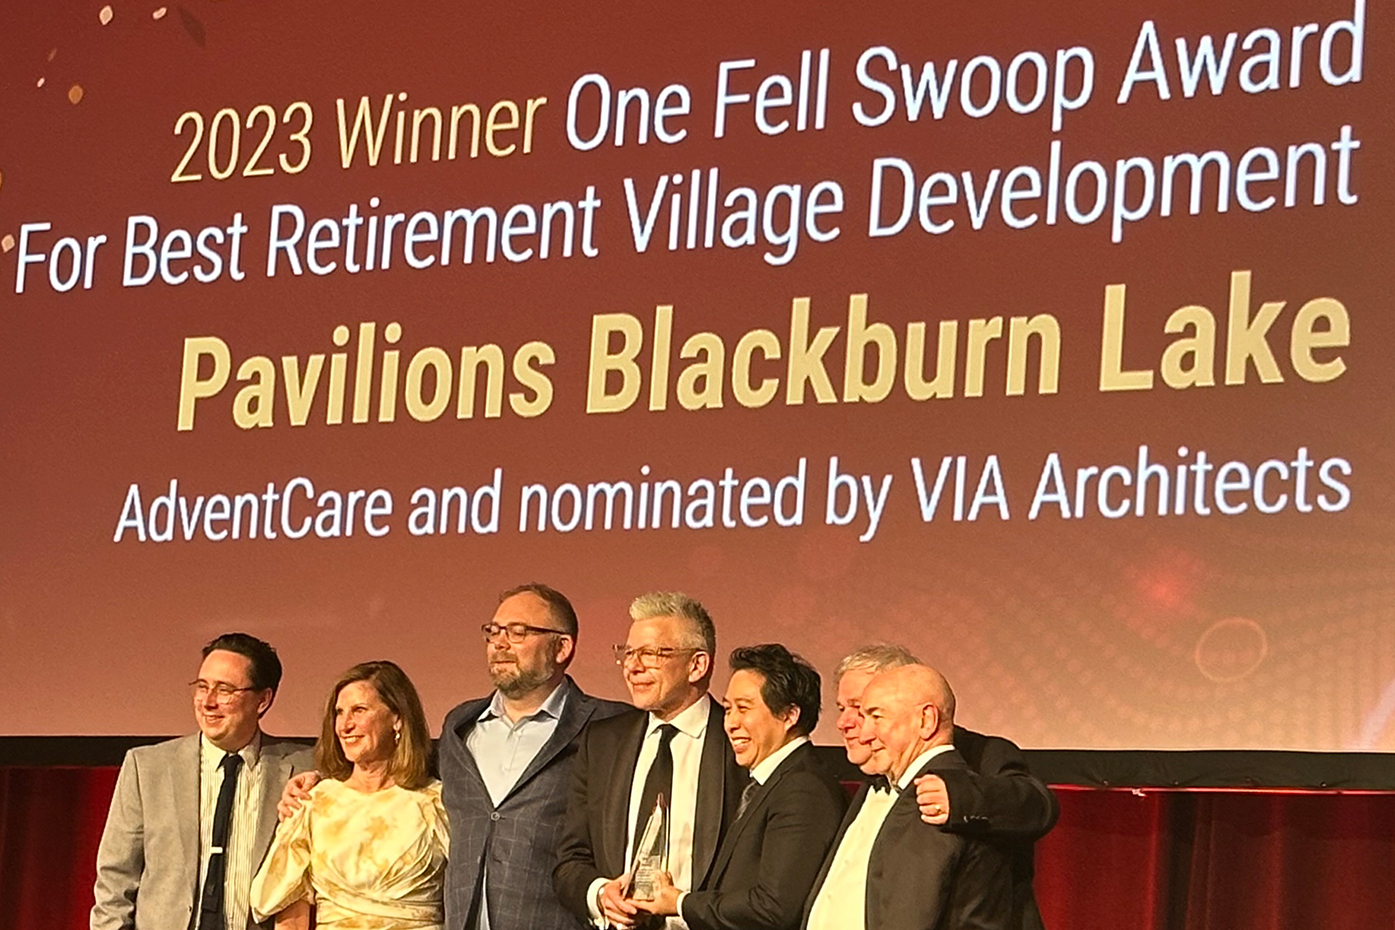 Back to back wins for Retirement Village of the Year